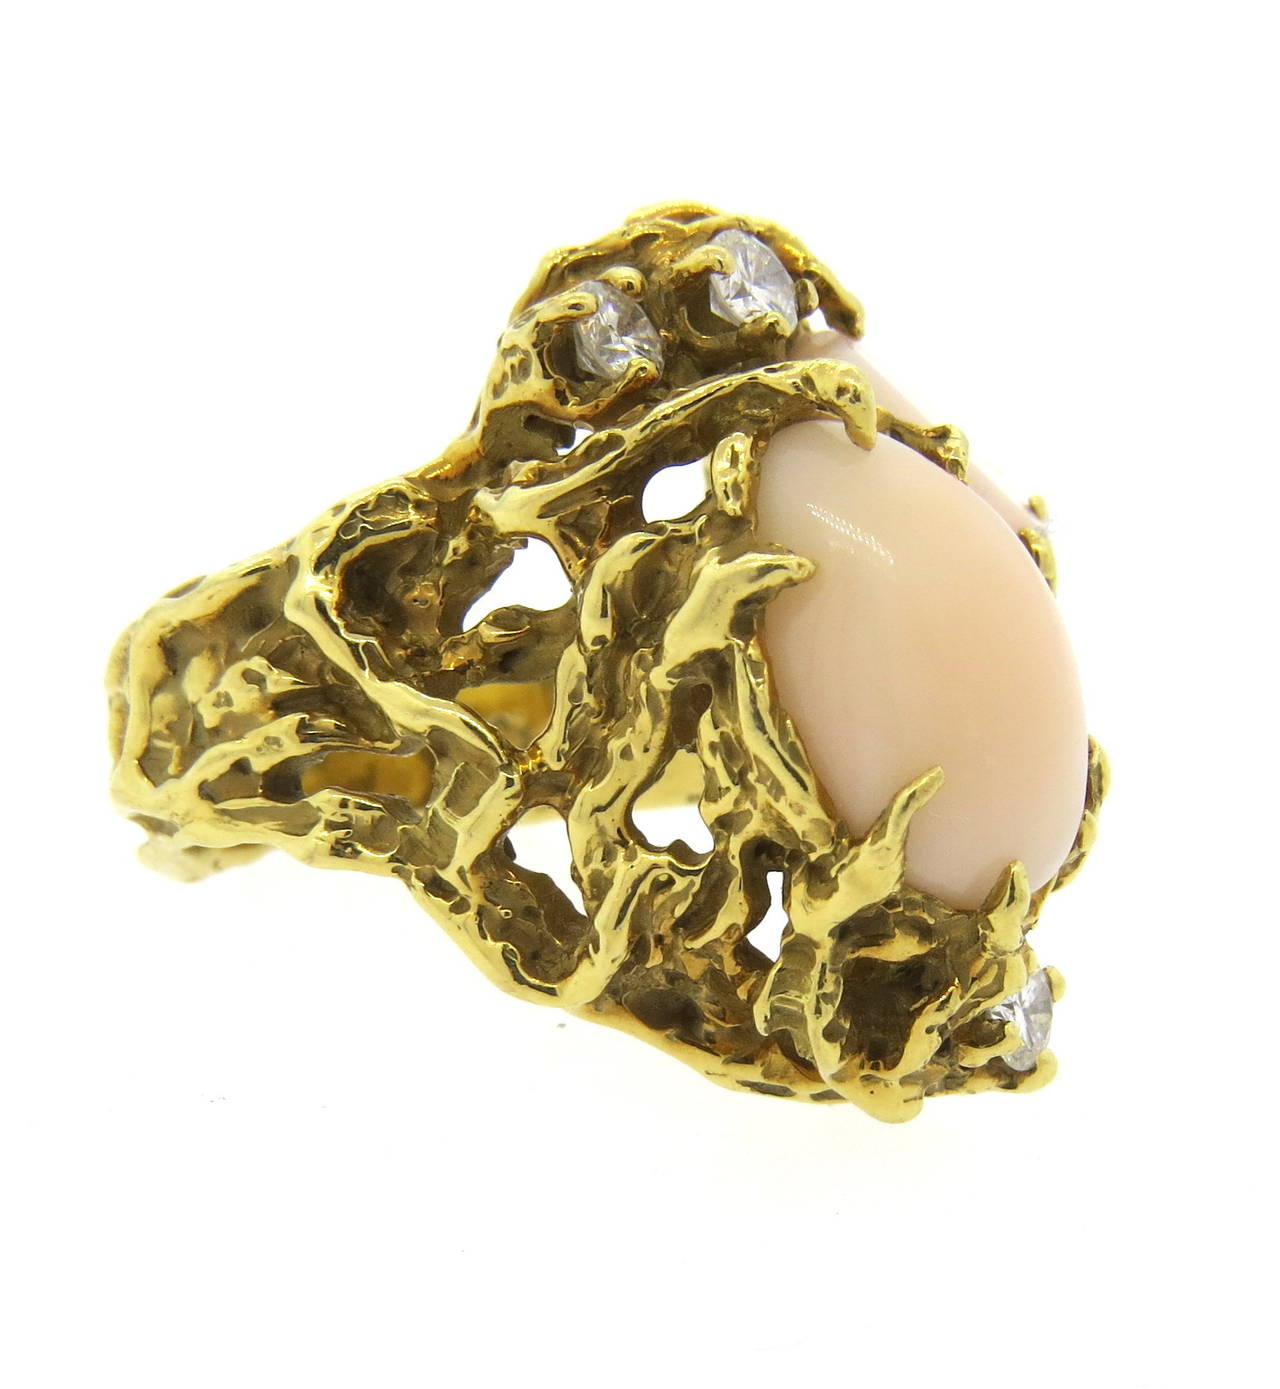 18k gold free form ring by Arthur King, featuring coral gemstones, surrounded with diamonds. Ring size 6, ring top is 25mm x 20mm. marked 18k and makers mark. weight - 17.5gr